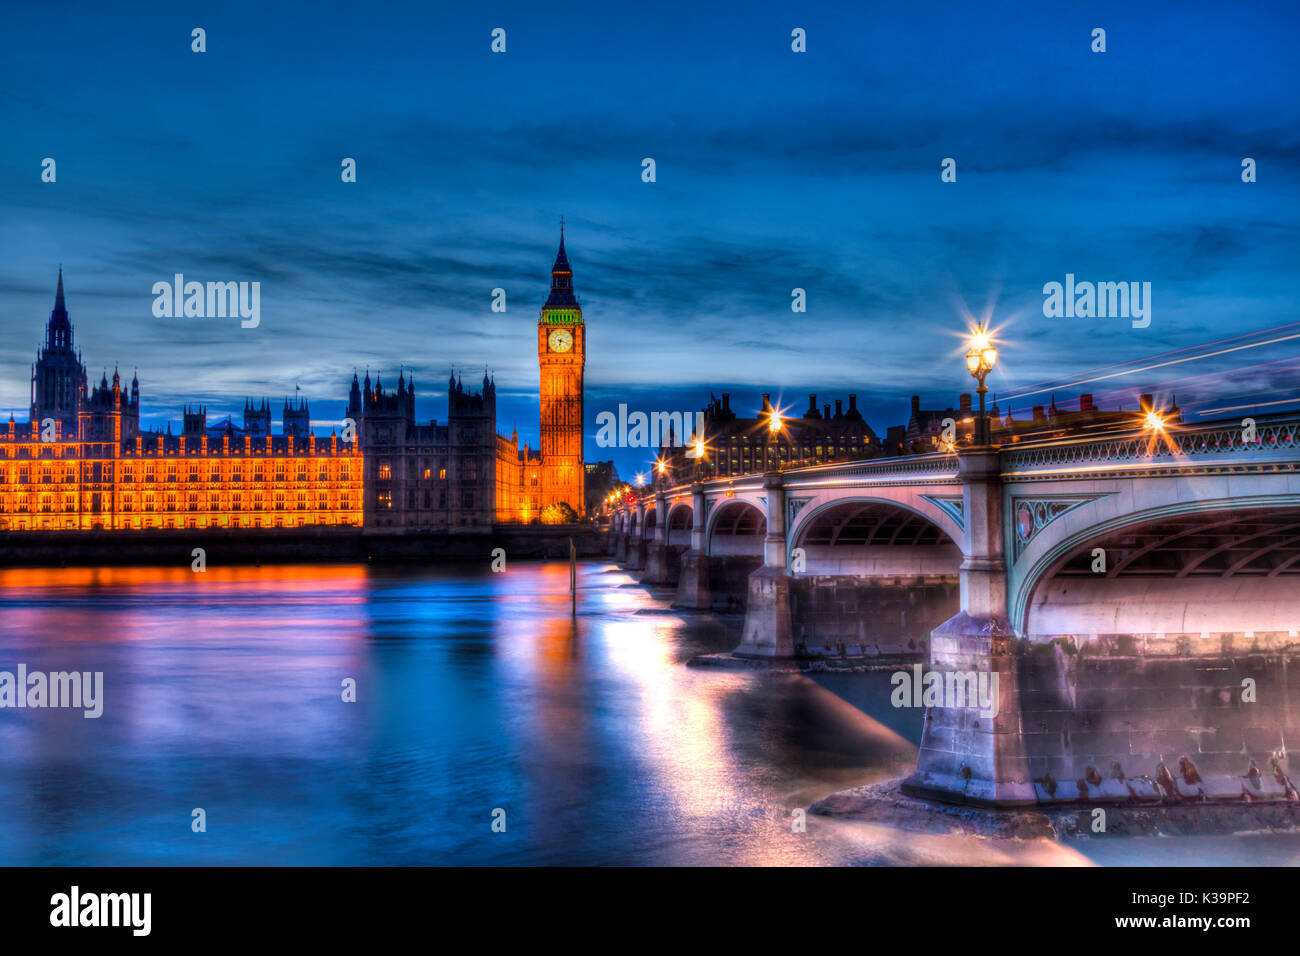 The Houses Of Parliament (Palace Of Westminster) and Westminster Bridge, London, UK Stock Photo